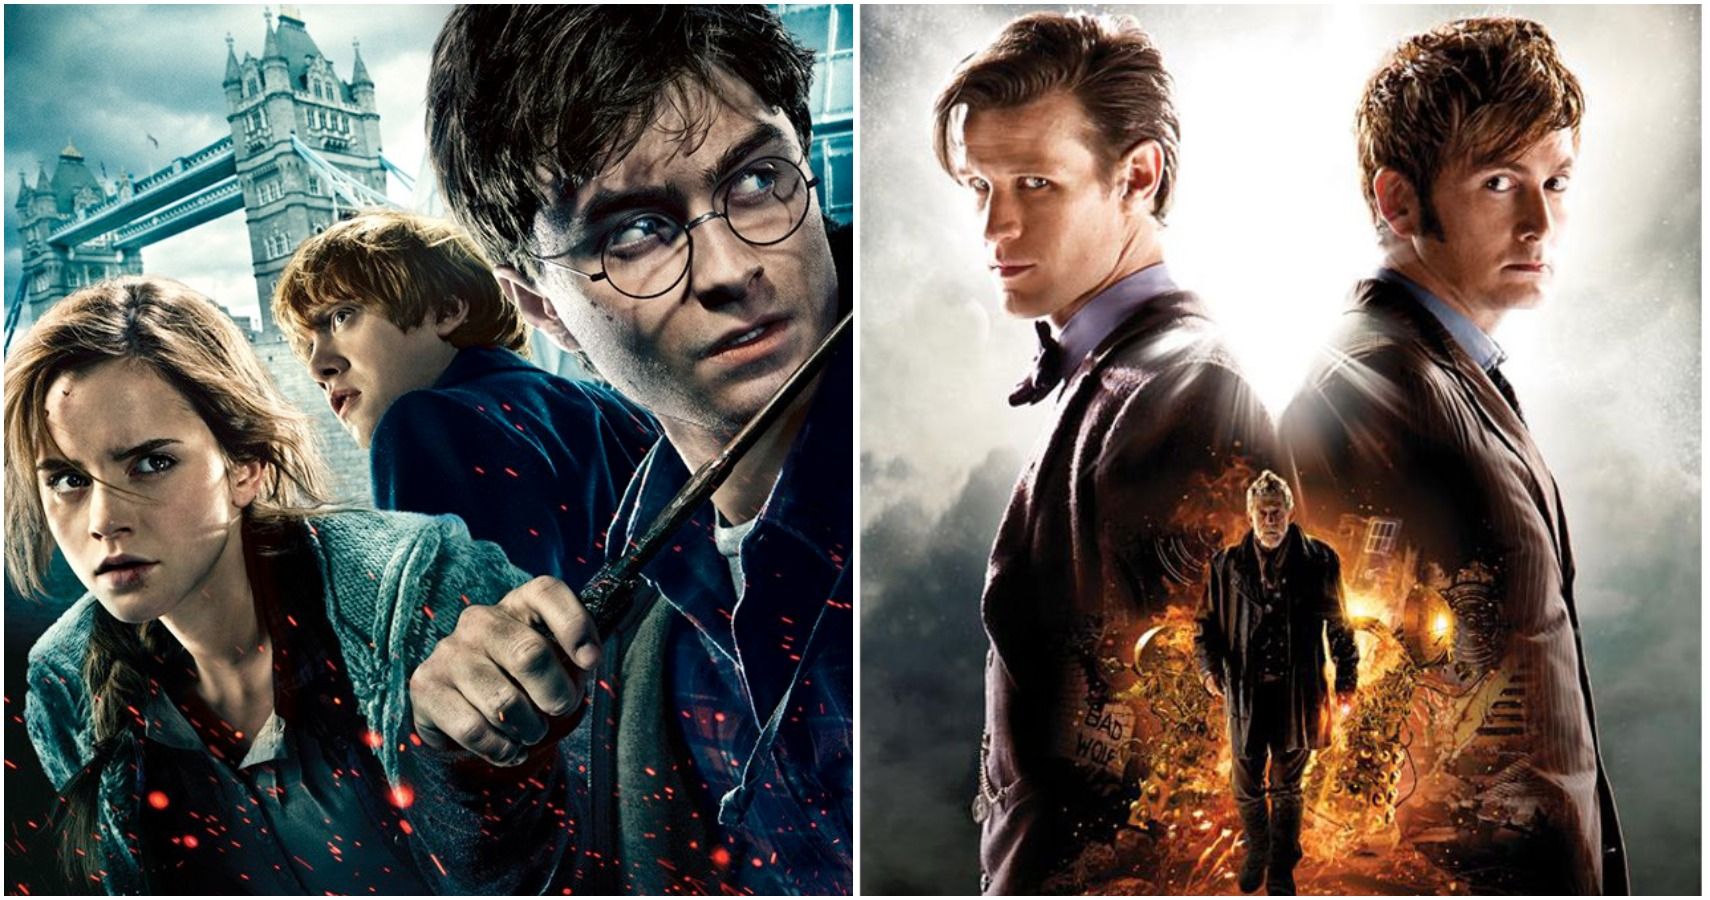 10 Things Harry Potter & Doctor Who Have In Common